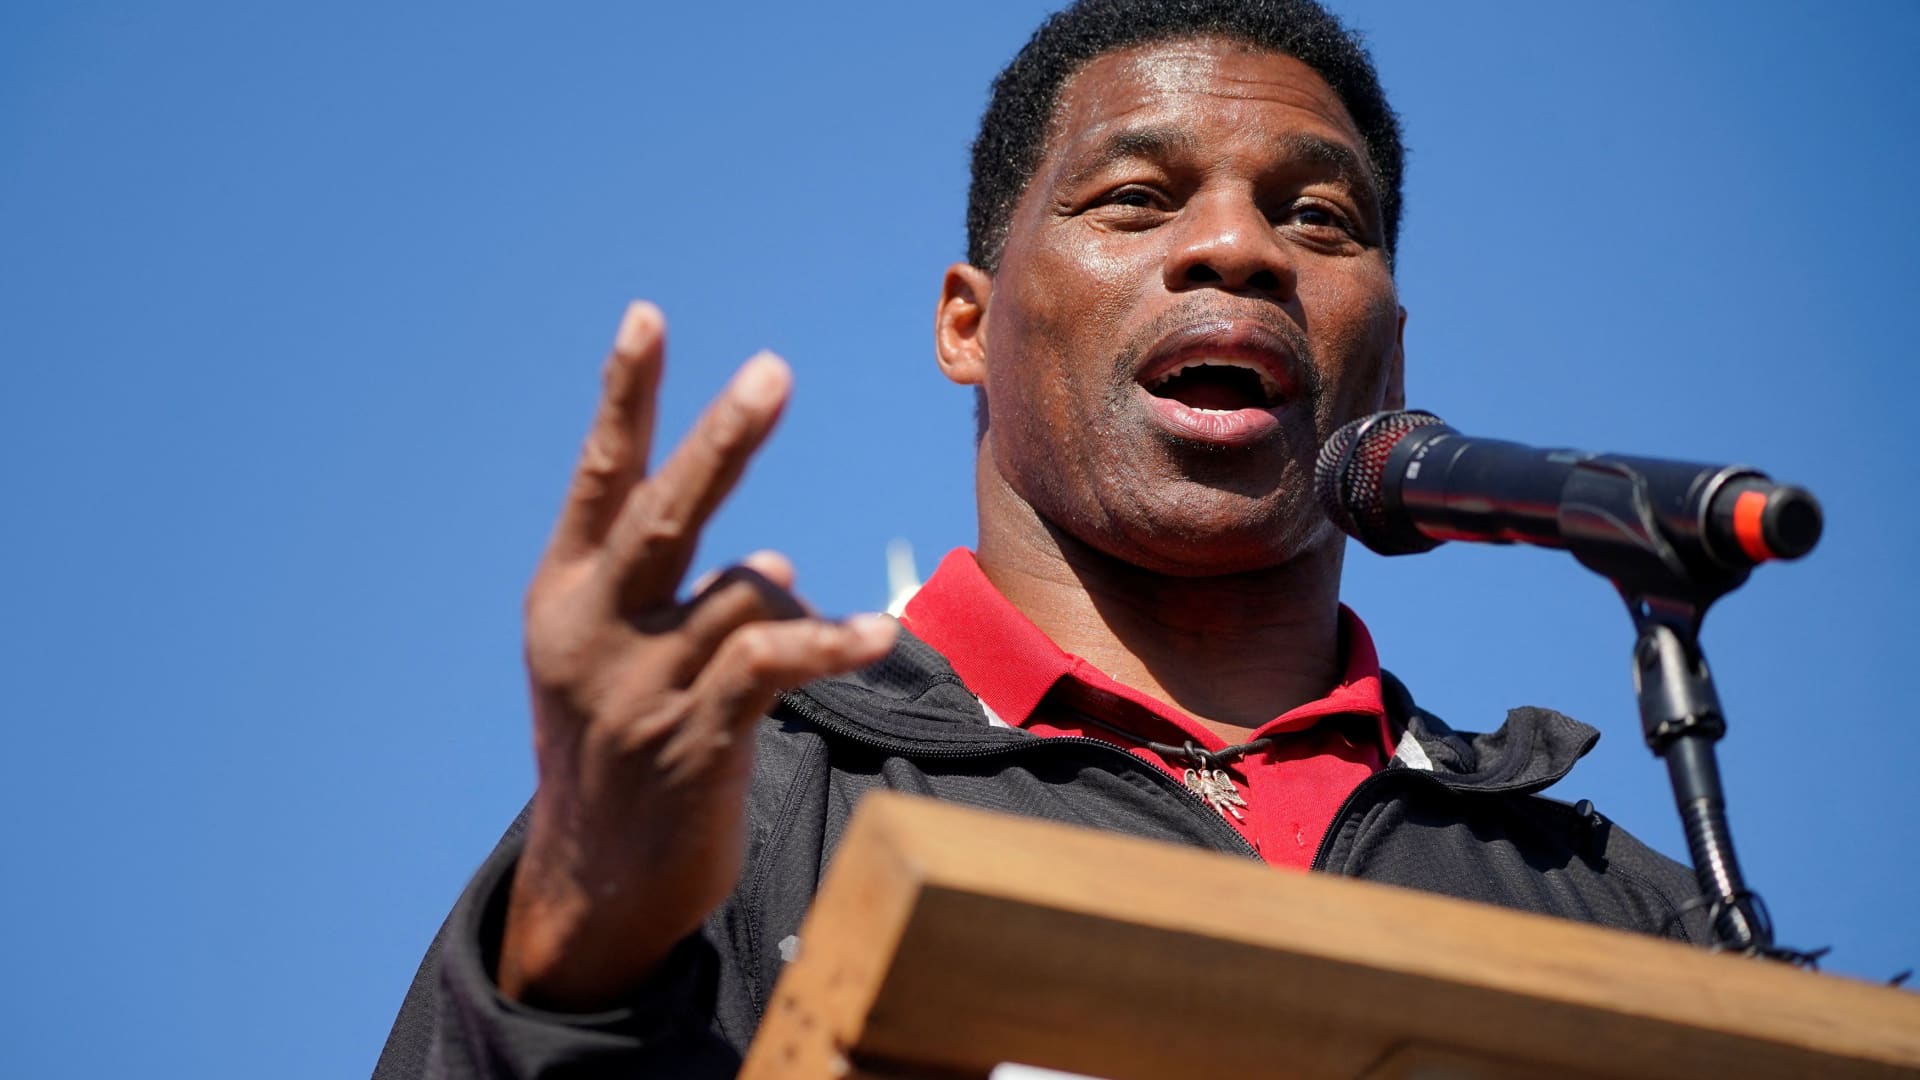 New woman says Herschel Walker got her pregnant and drove her to abortion clinic